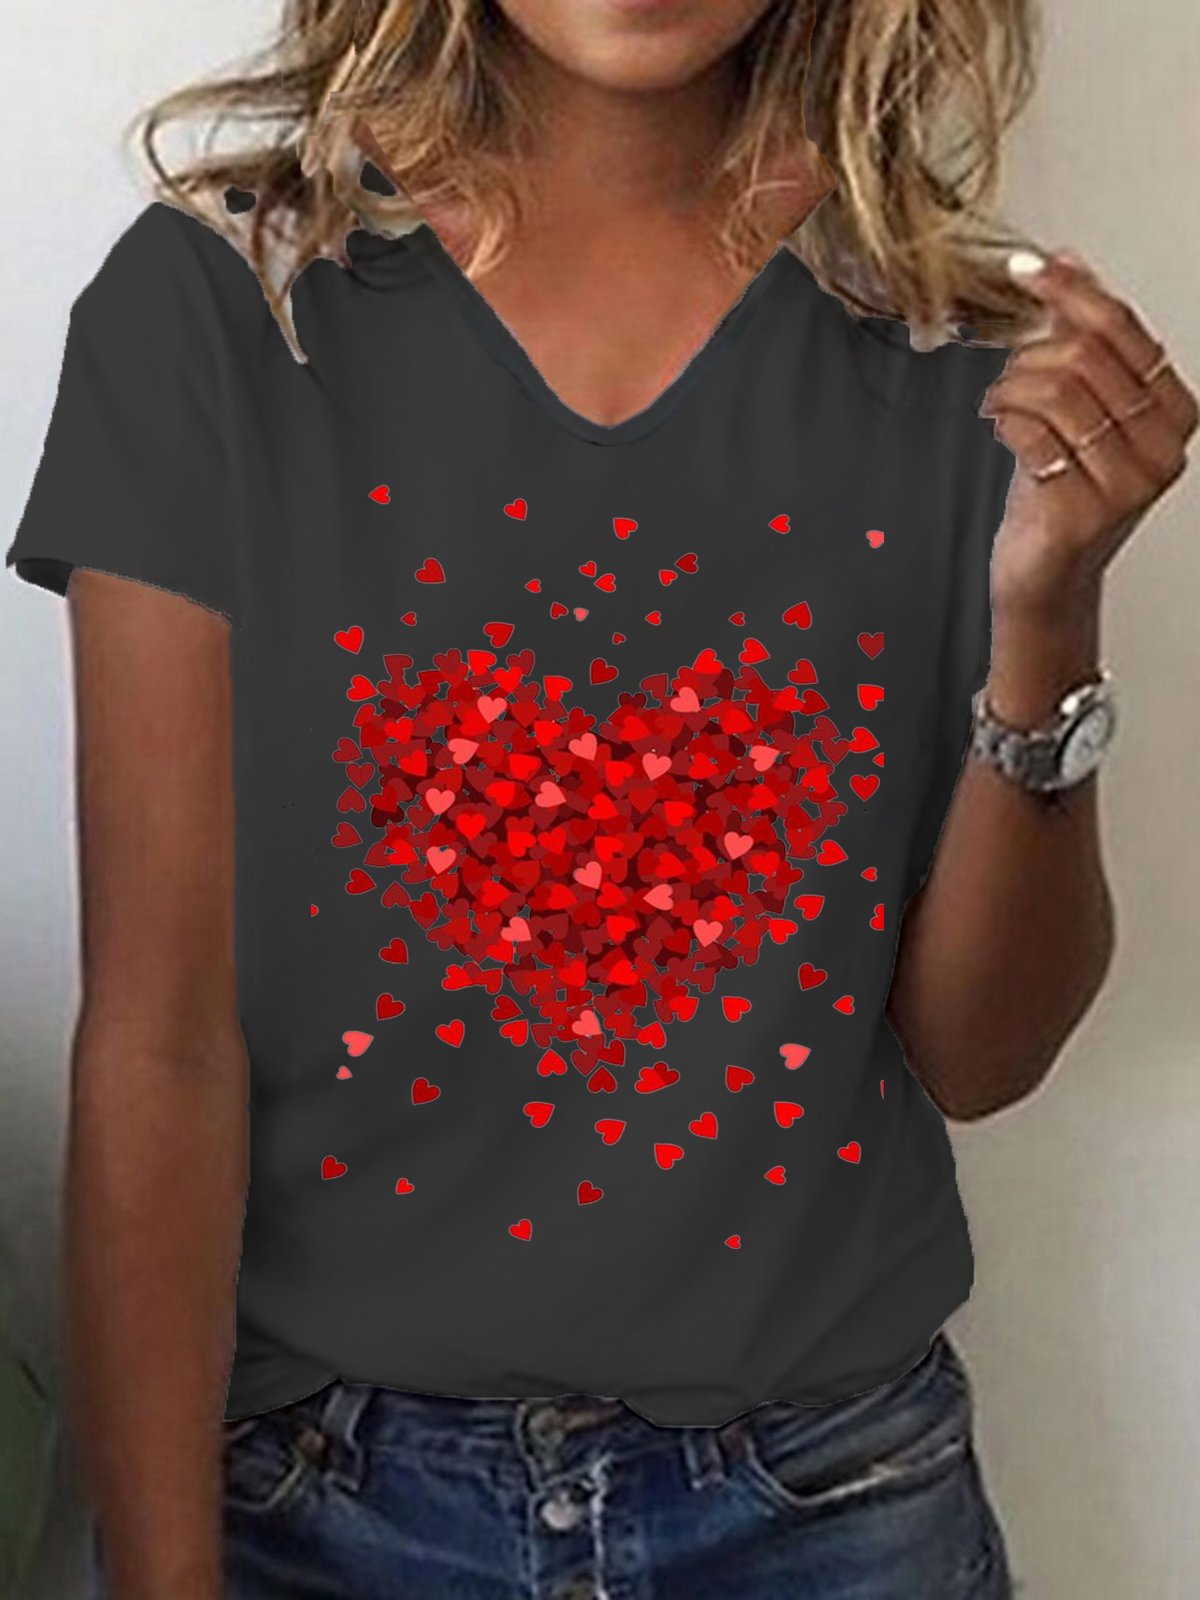 Women's Heart Print T-Shirt Tee For Valentine's Day Gifts V Neck Casual Short Sleeve Top Spring & Summer White Black Blue